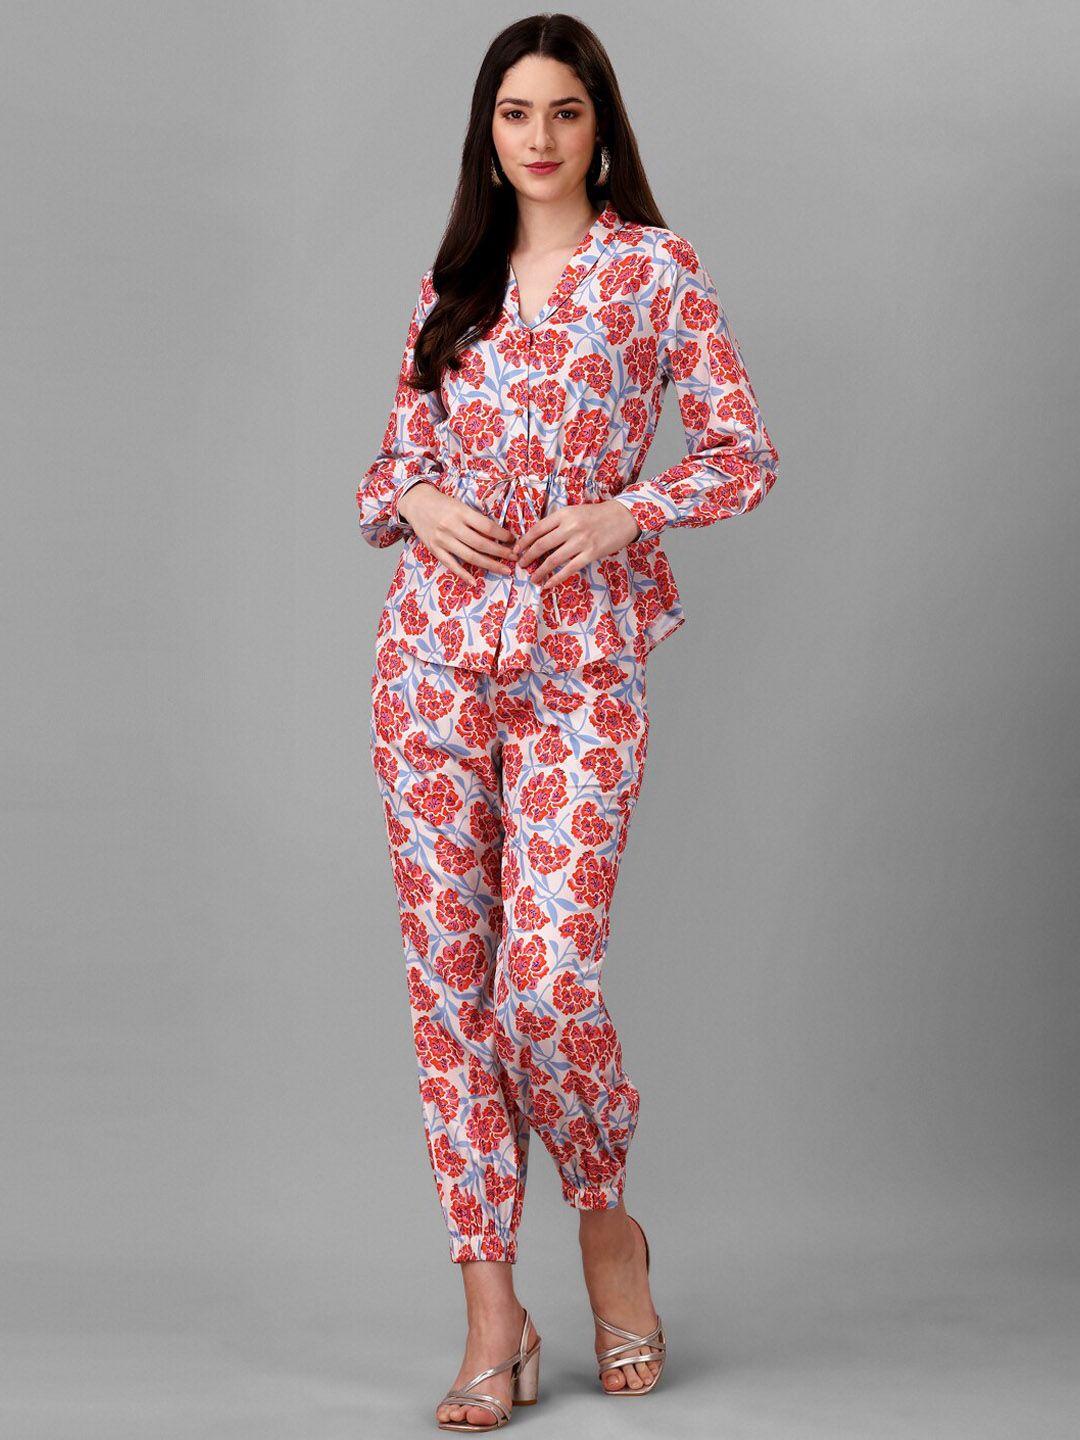 masakali.co flower printed shirt with trousers co-ords set